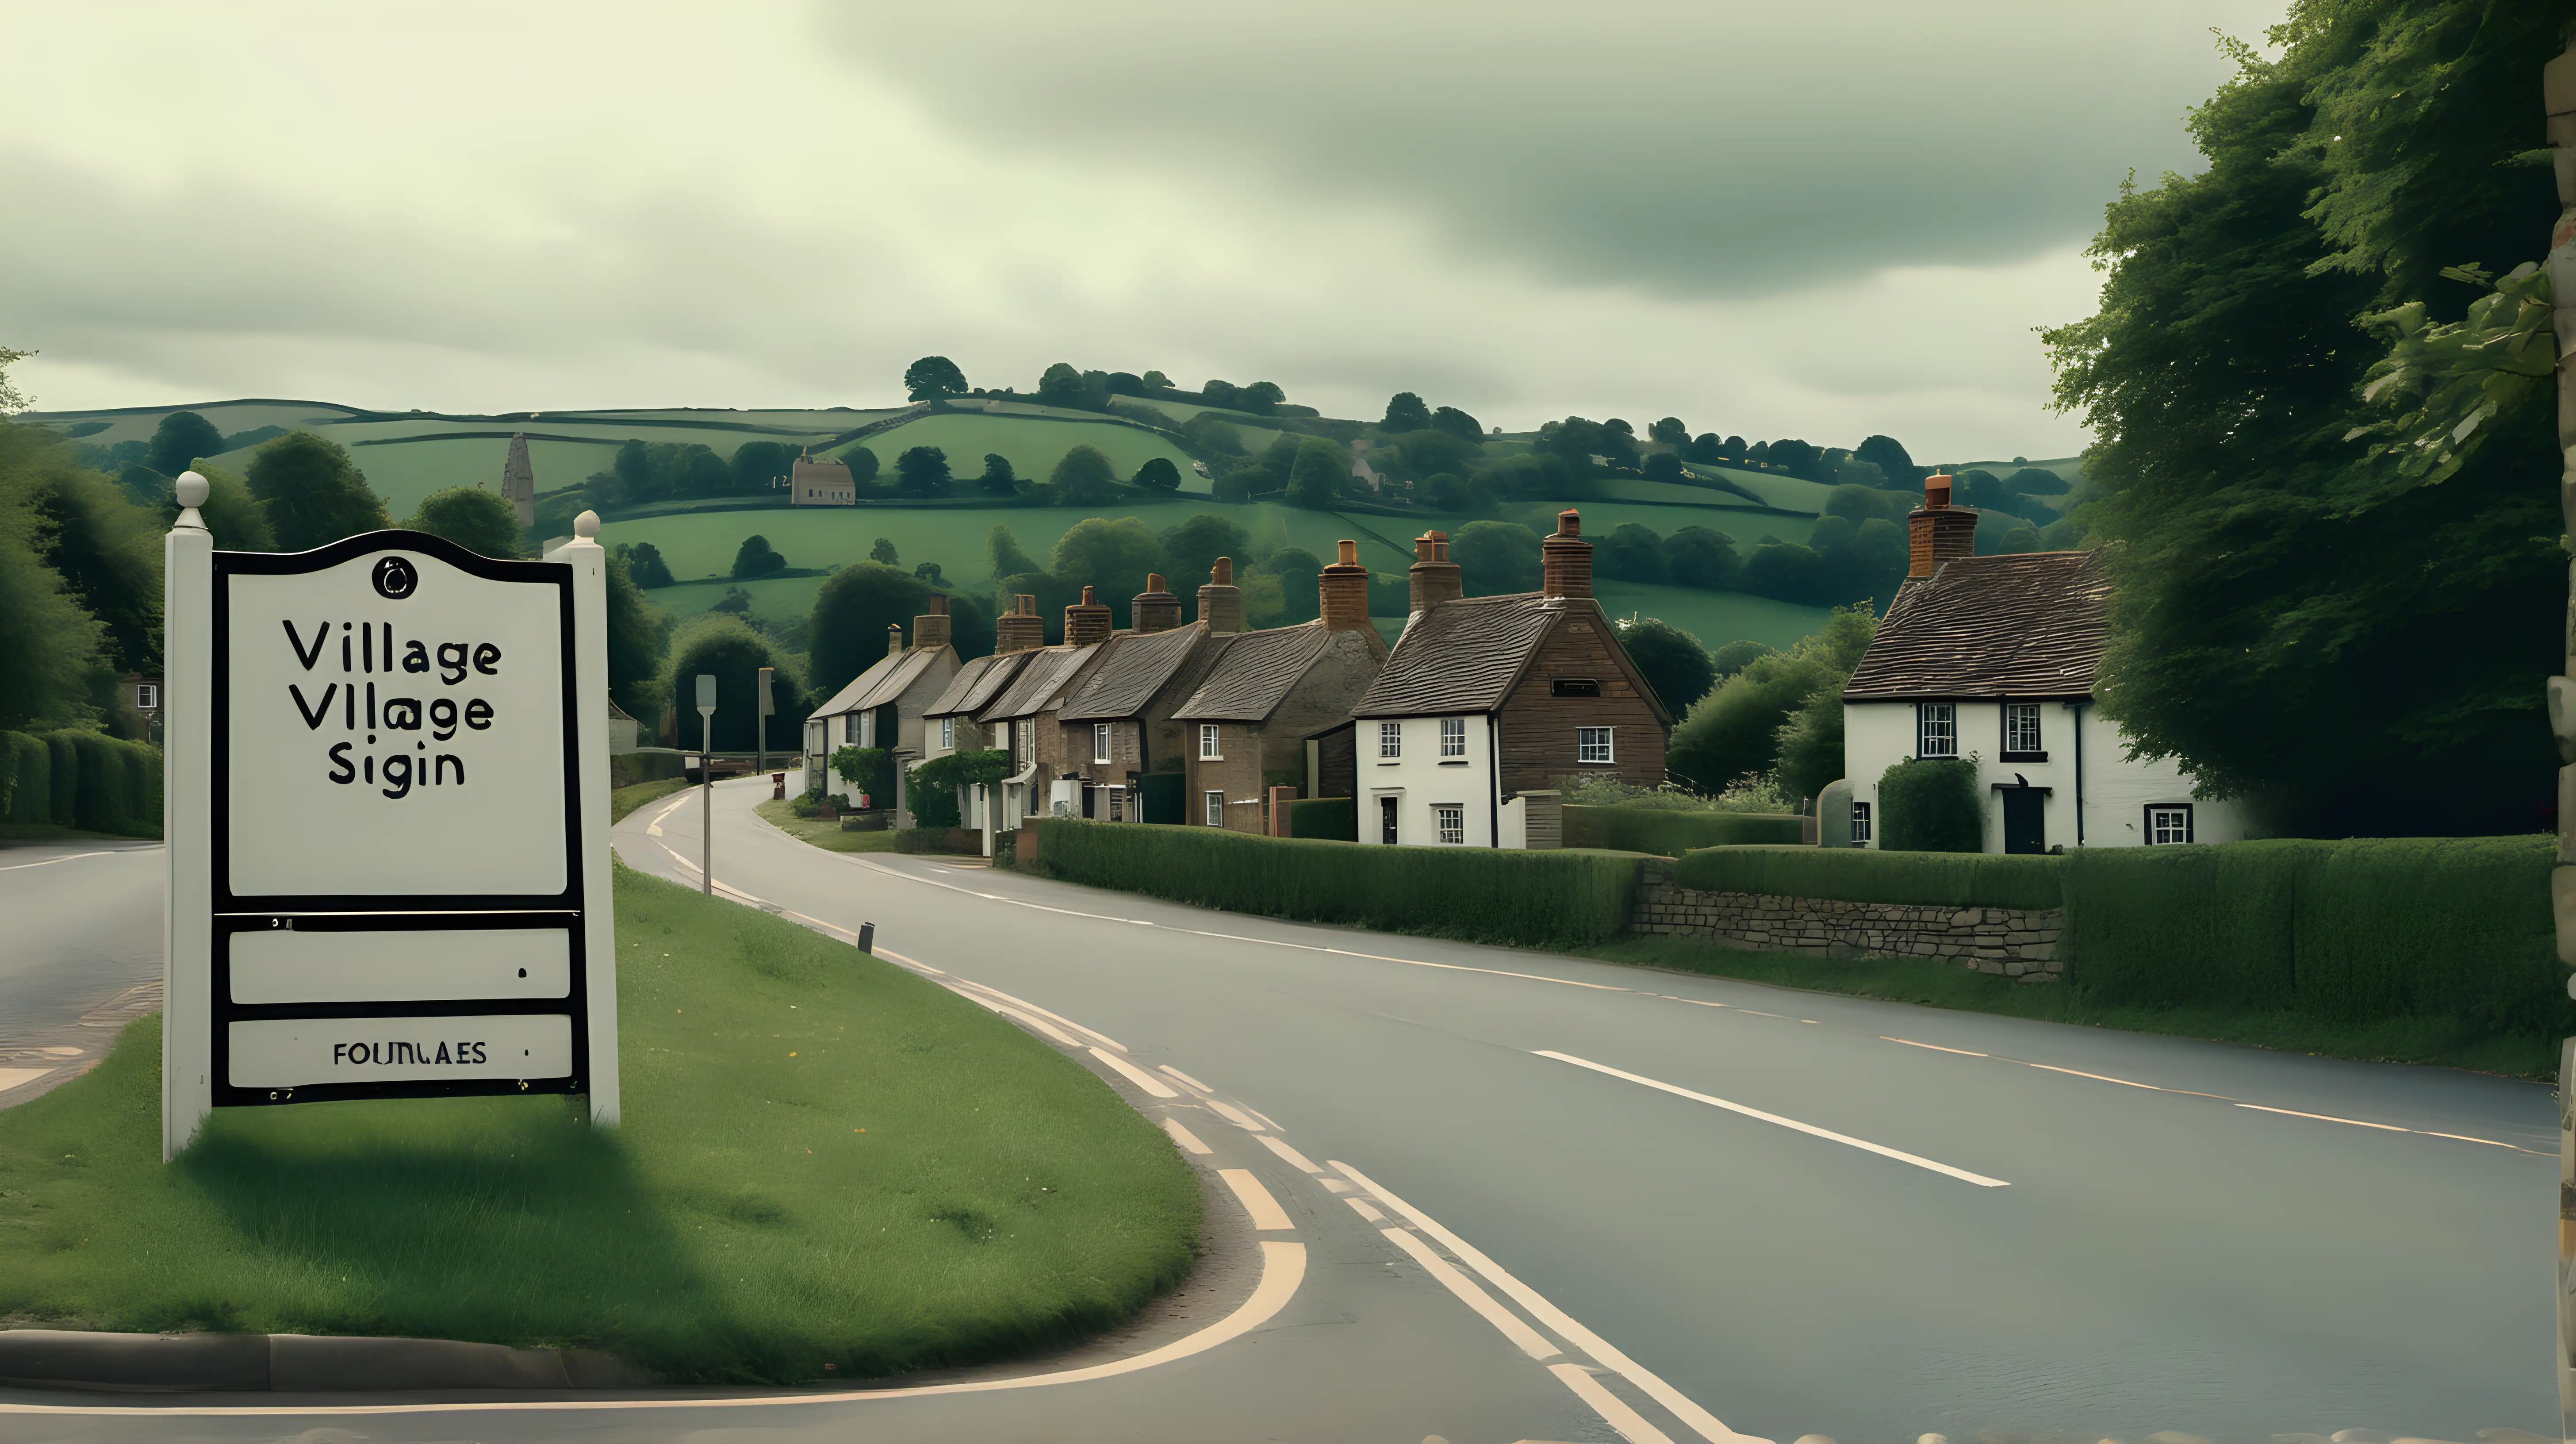 A village sign in the foreground, on the outskirts of a cute English Village, on a road that leads into a cute English Village.  Ultra realistic. Street level Shot.  Hills and trees in the distance behind the village.